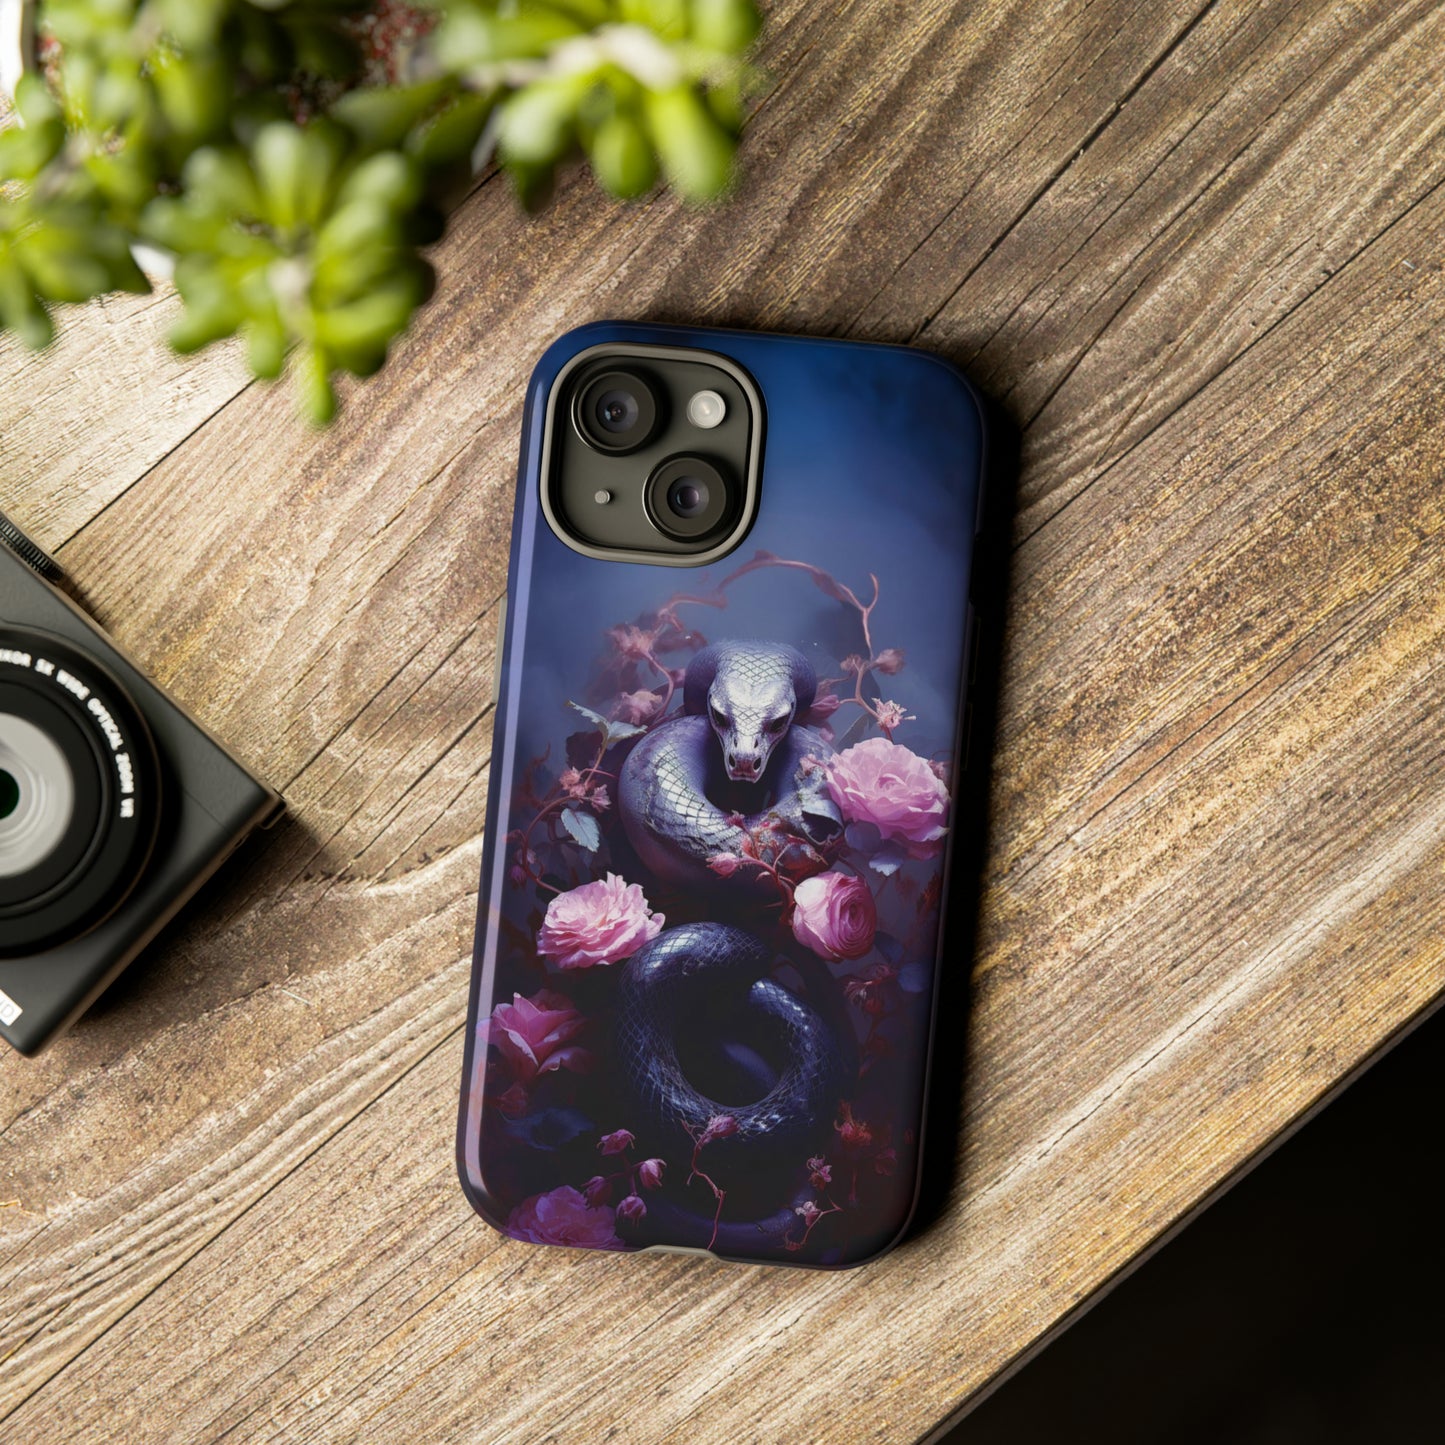 Scion of Chaos Snake - Phone Cases